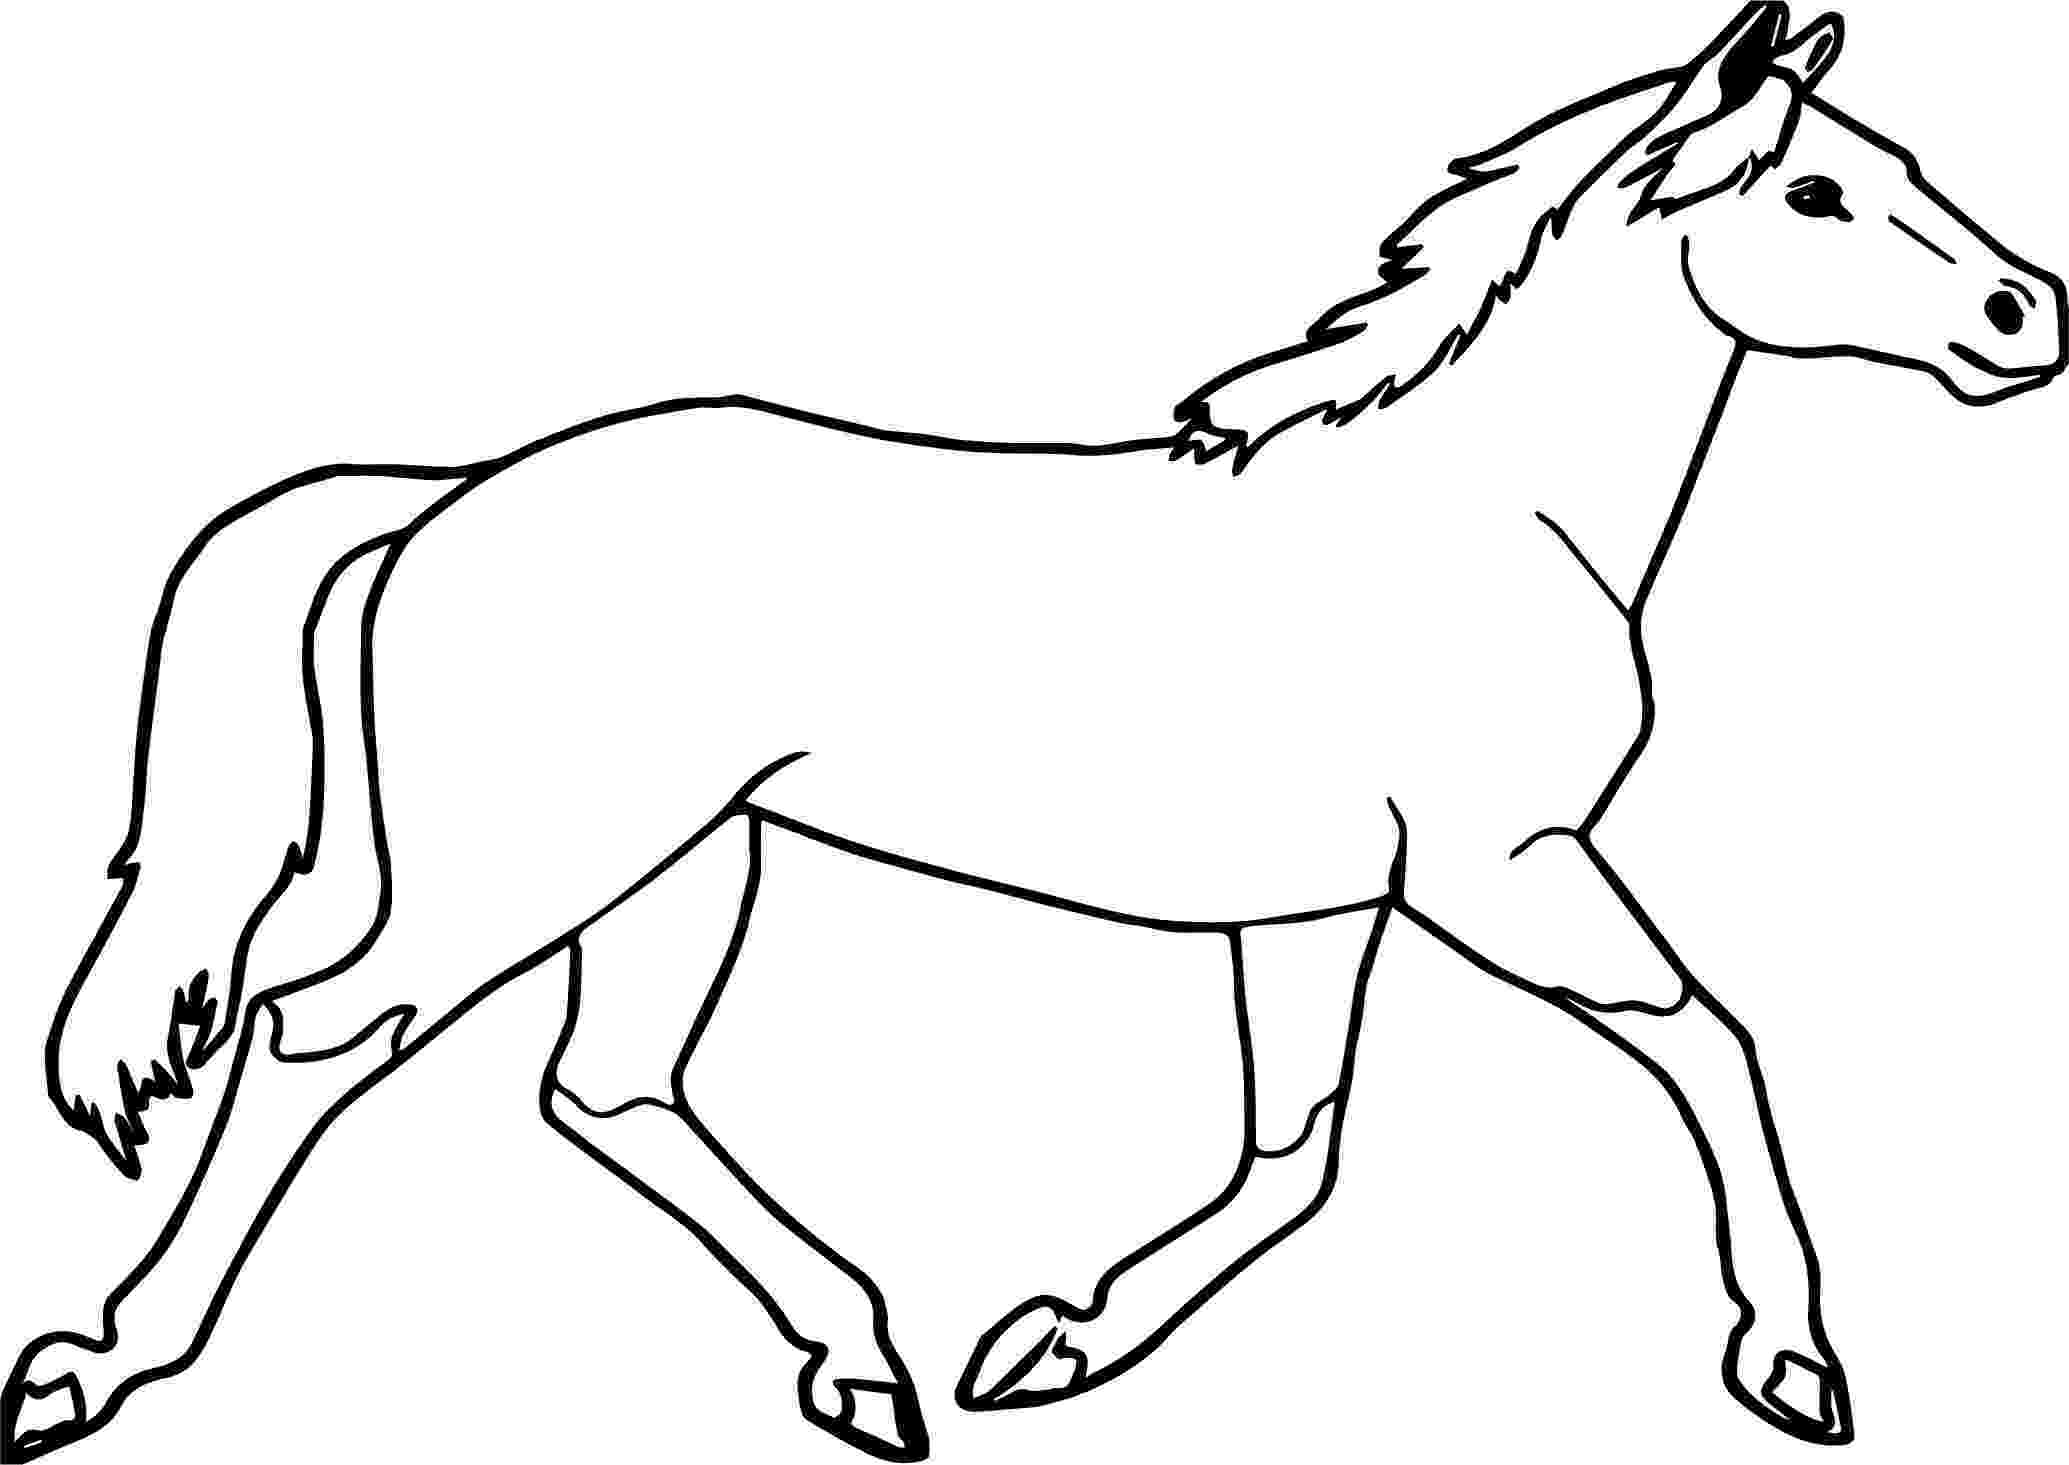 arabian horse pictures to print horse head coloring page getcoloringpagescom arabian horse print pictures to 